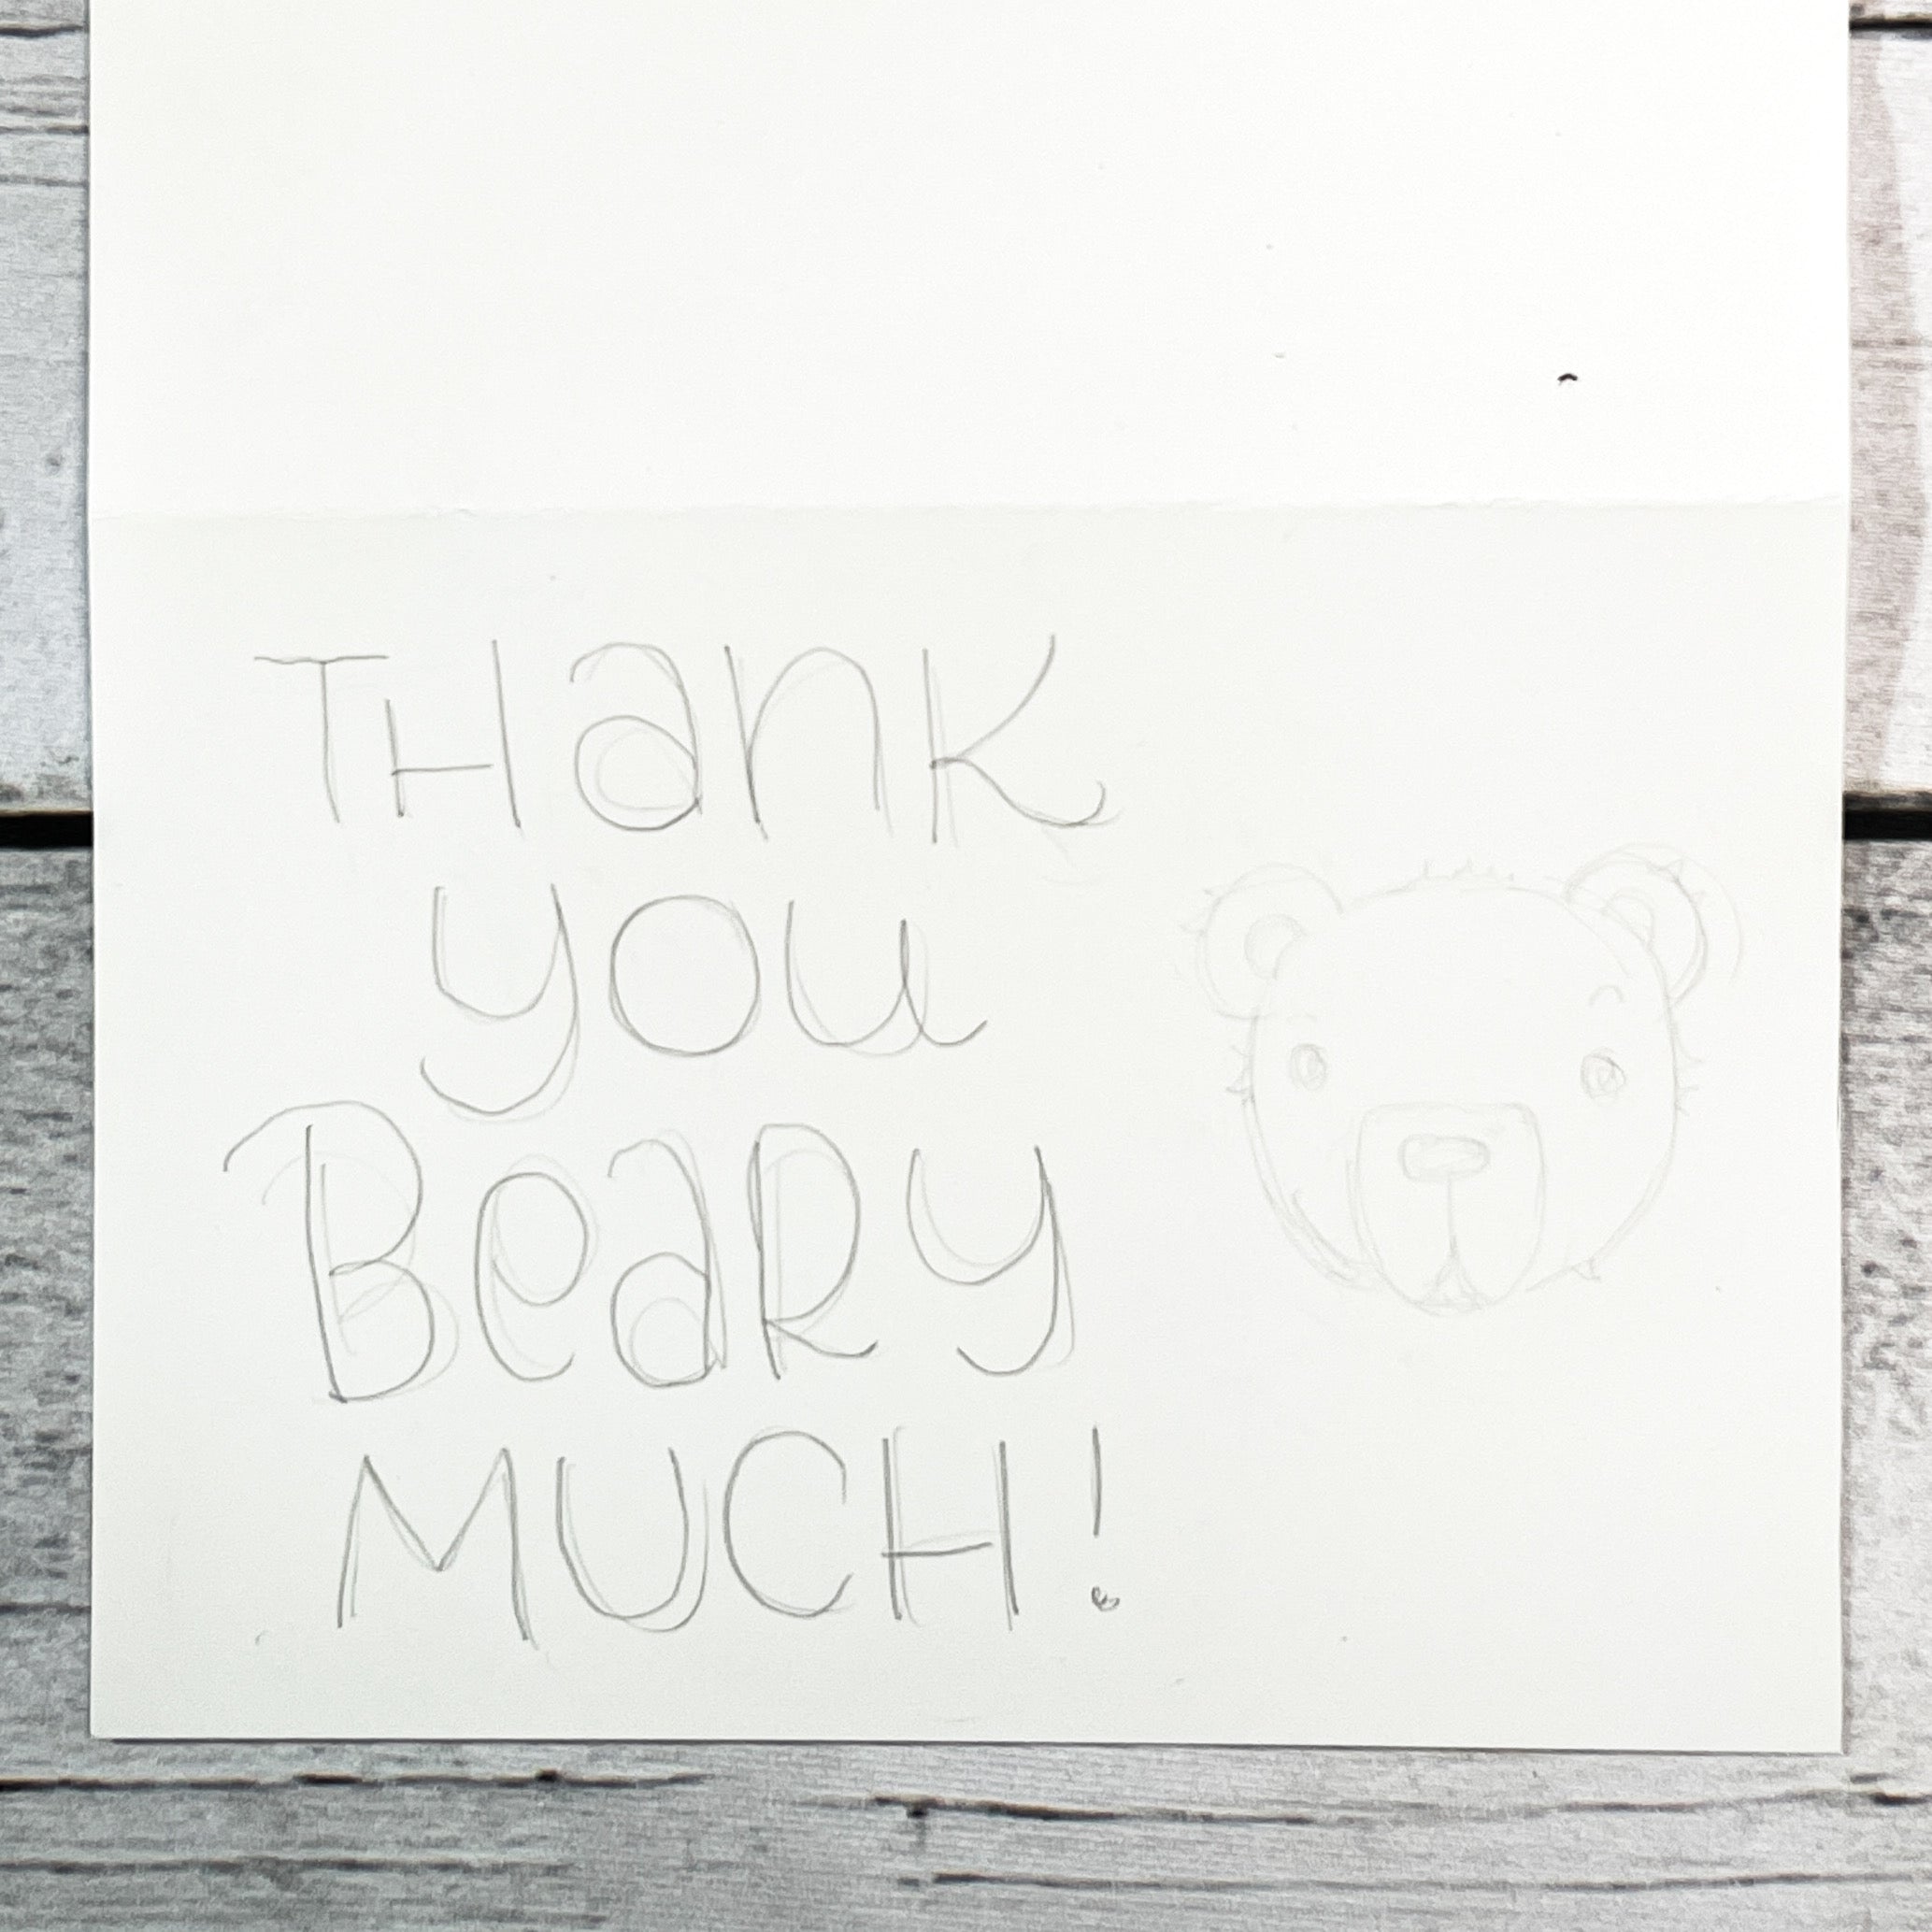 photo of handwritten text "thank you beary much"